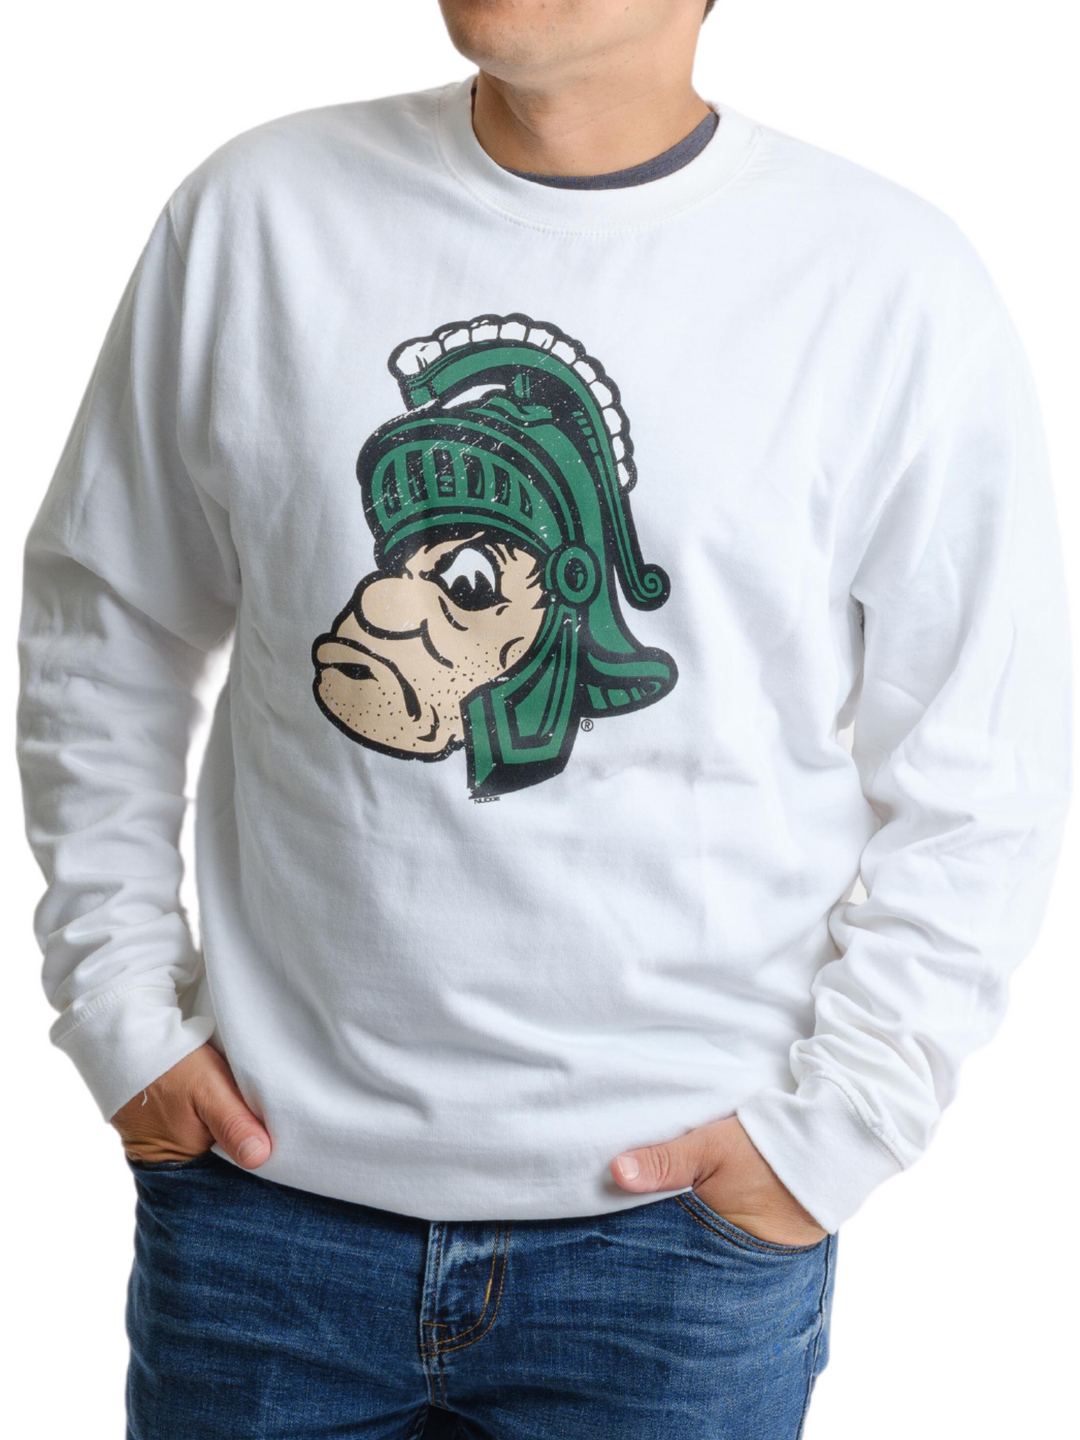 Vintage Michigan State Full Color Gruff Sparty White Crewneck Sweatshirt Pullover